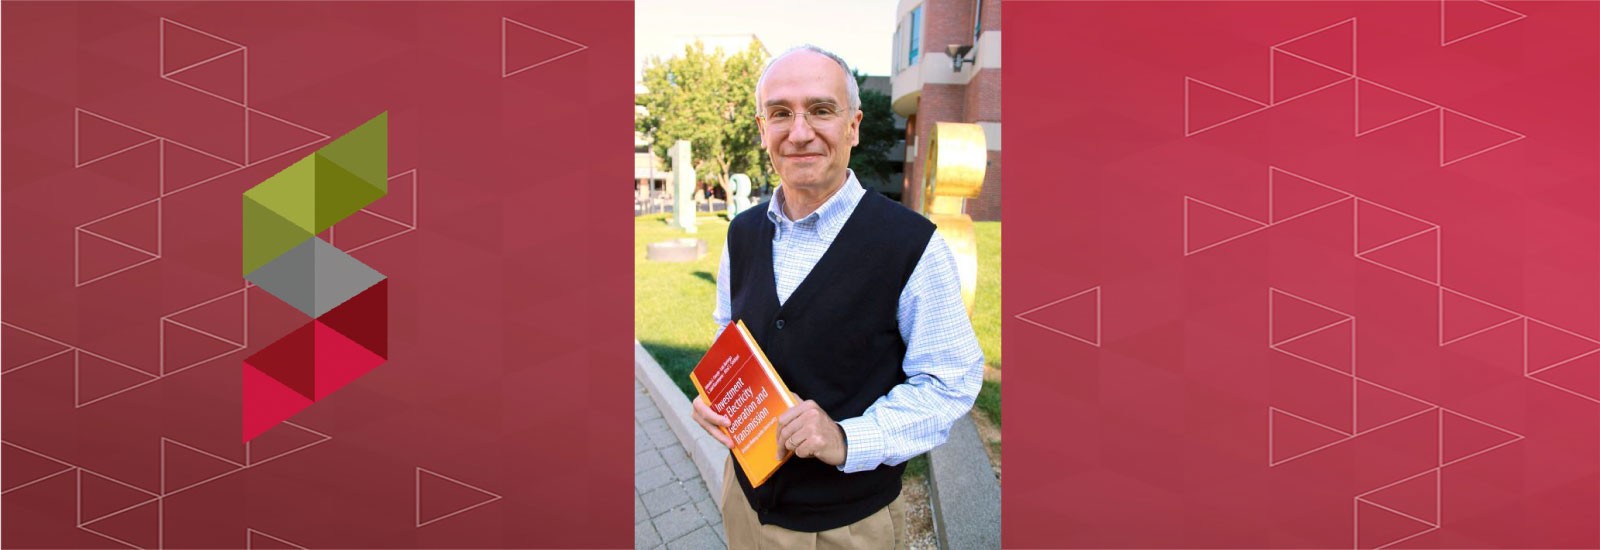 Ohio State Electrical and Computer Engineering (ECE) Professor Antonio Conejo holding a textbook outside